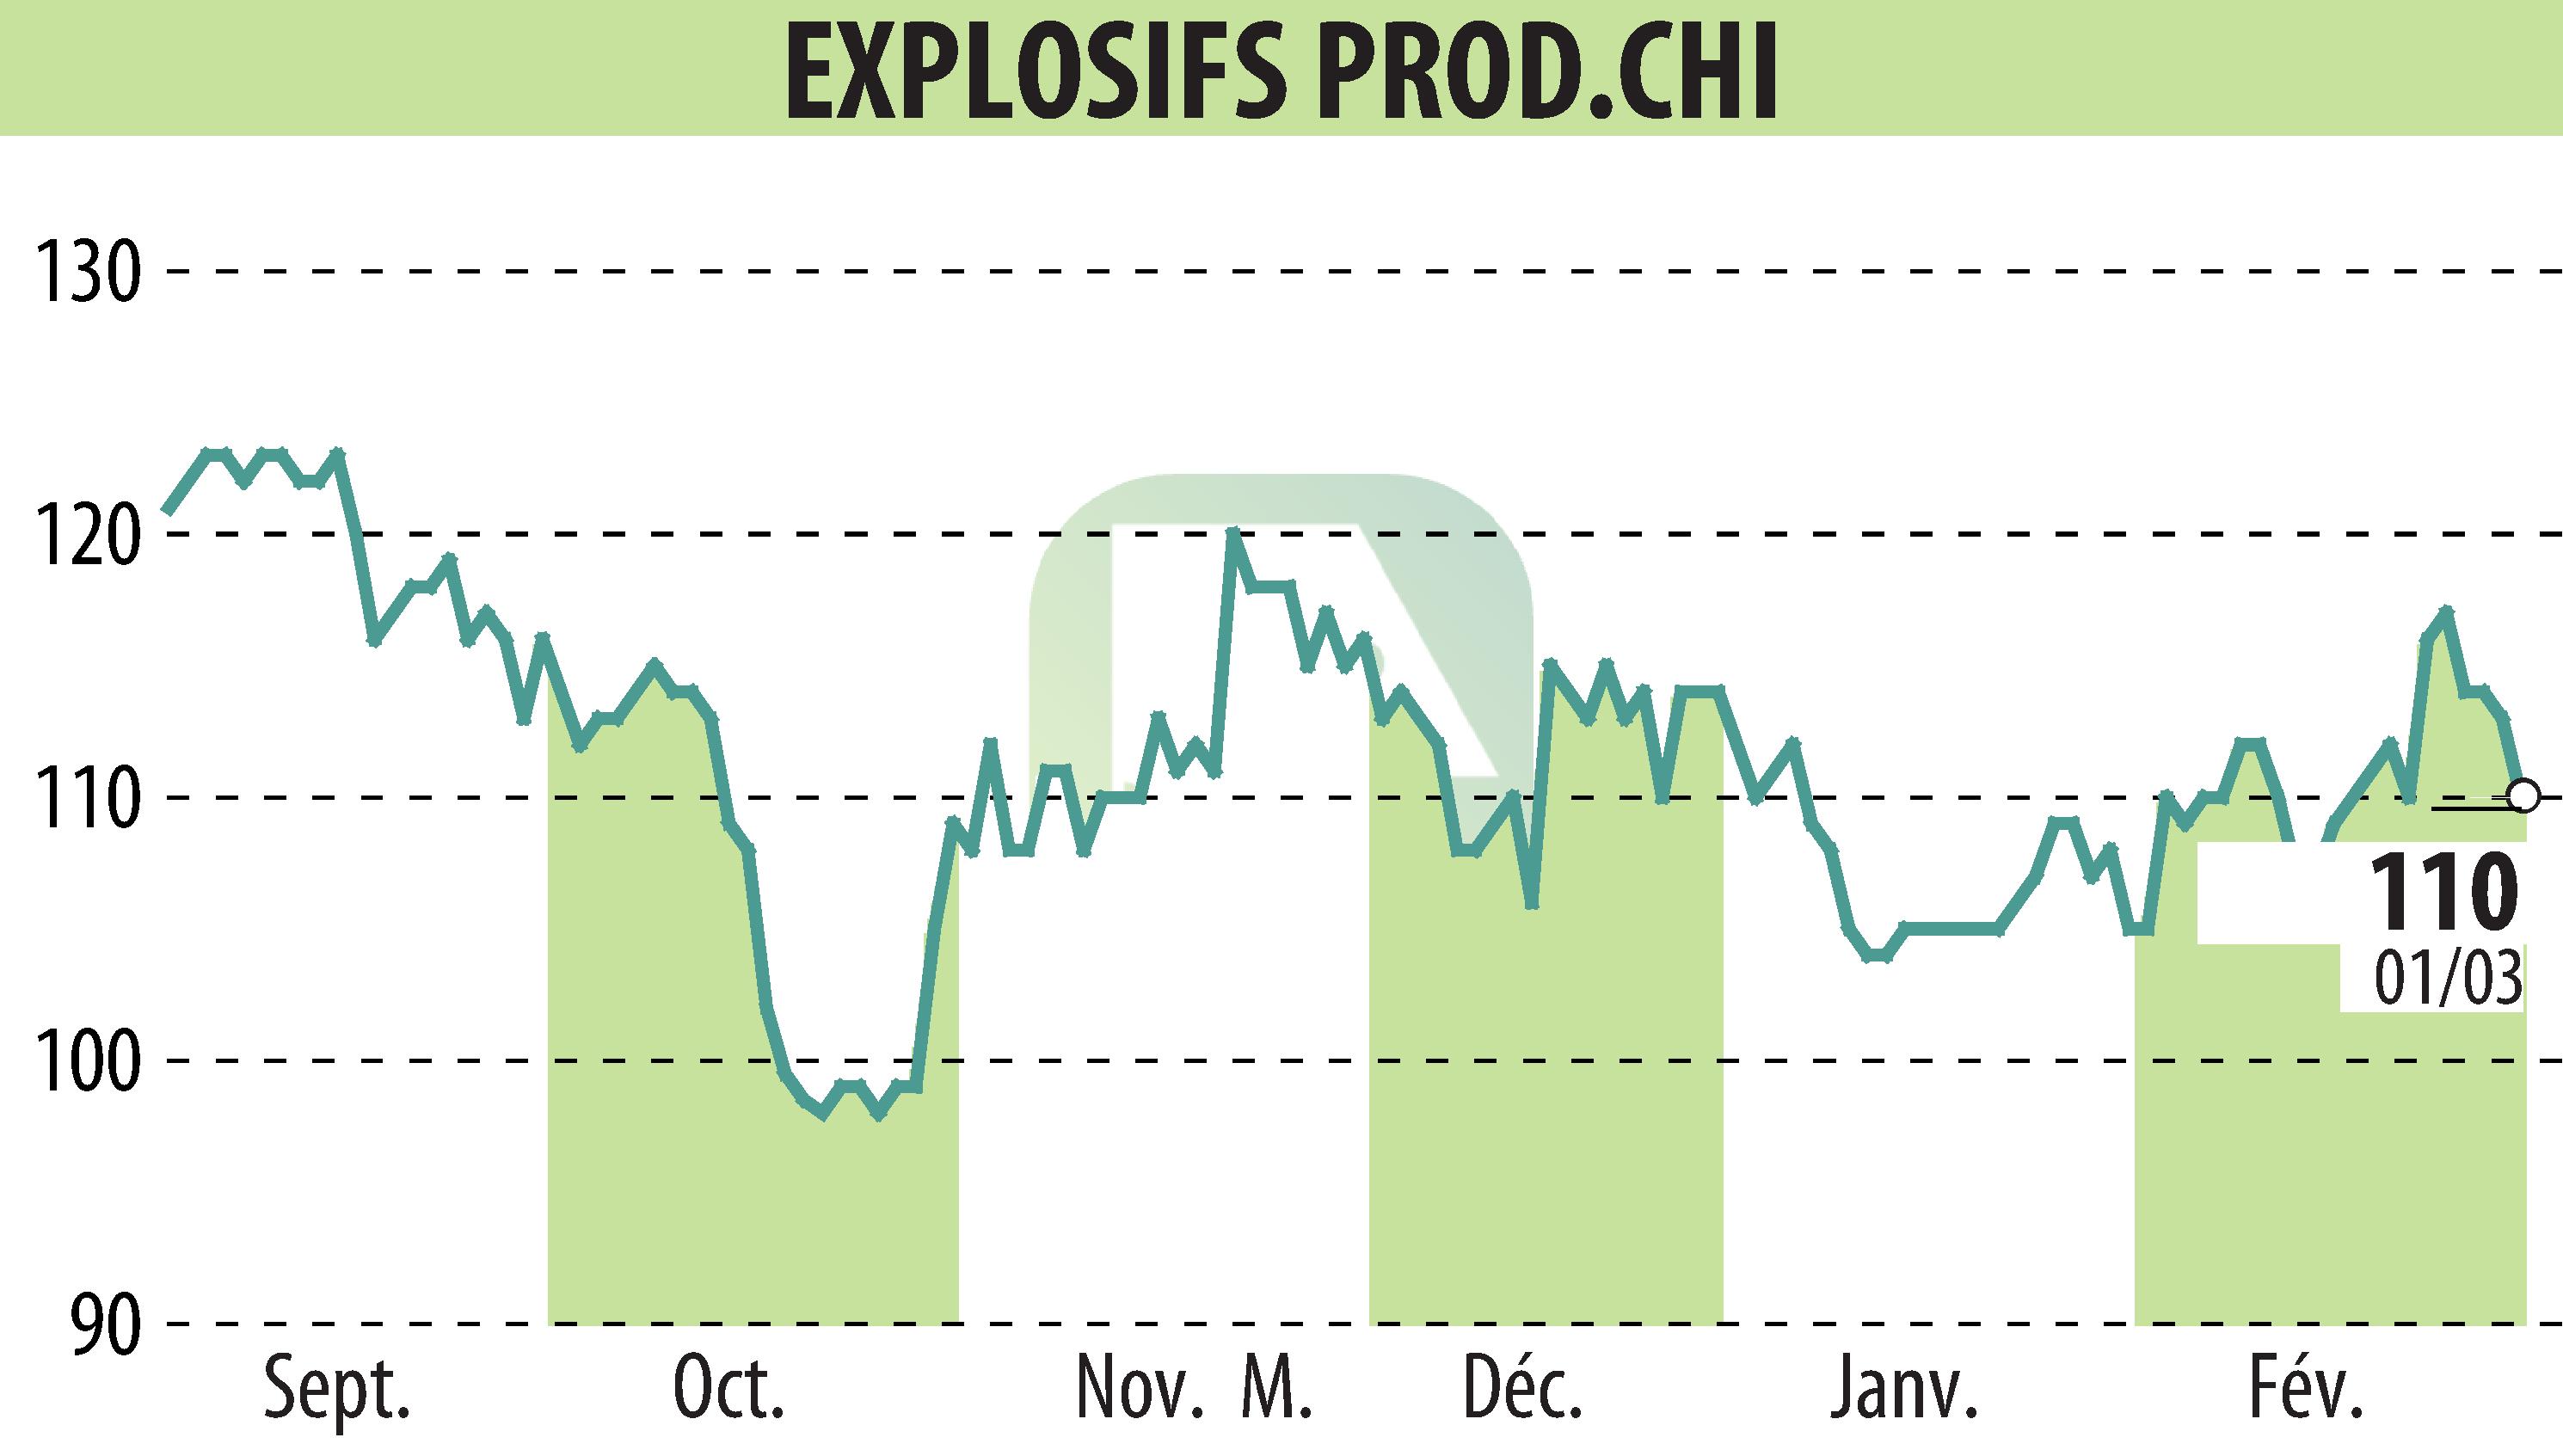 Stock price chart of EPC (EPA:EXPL) showing fluctuations